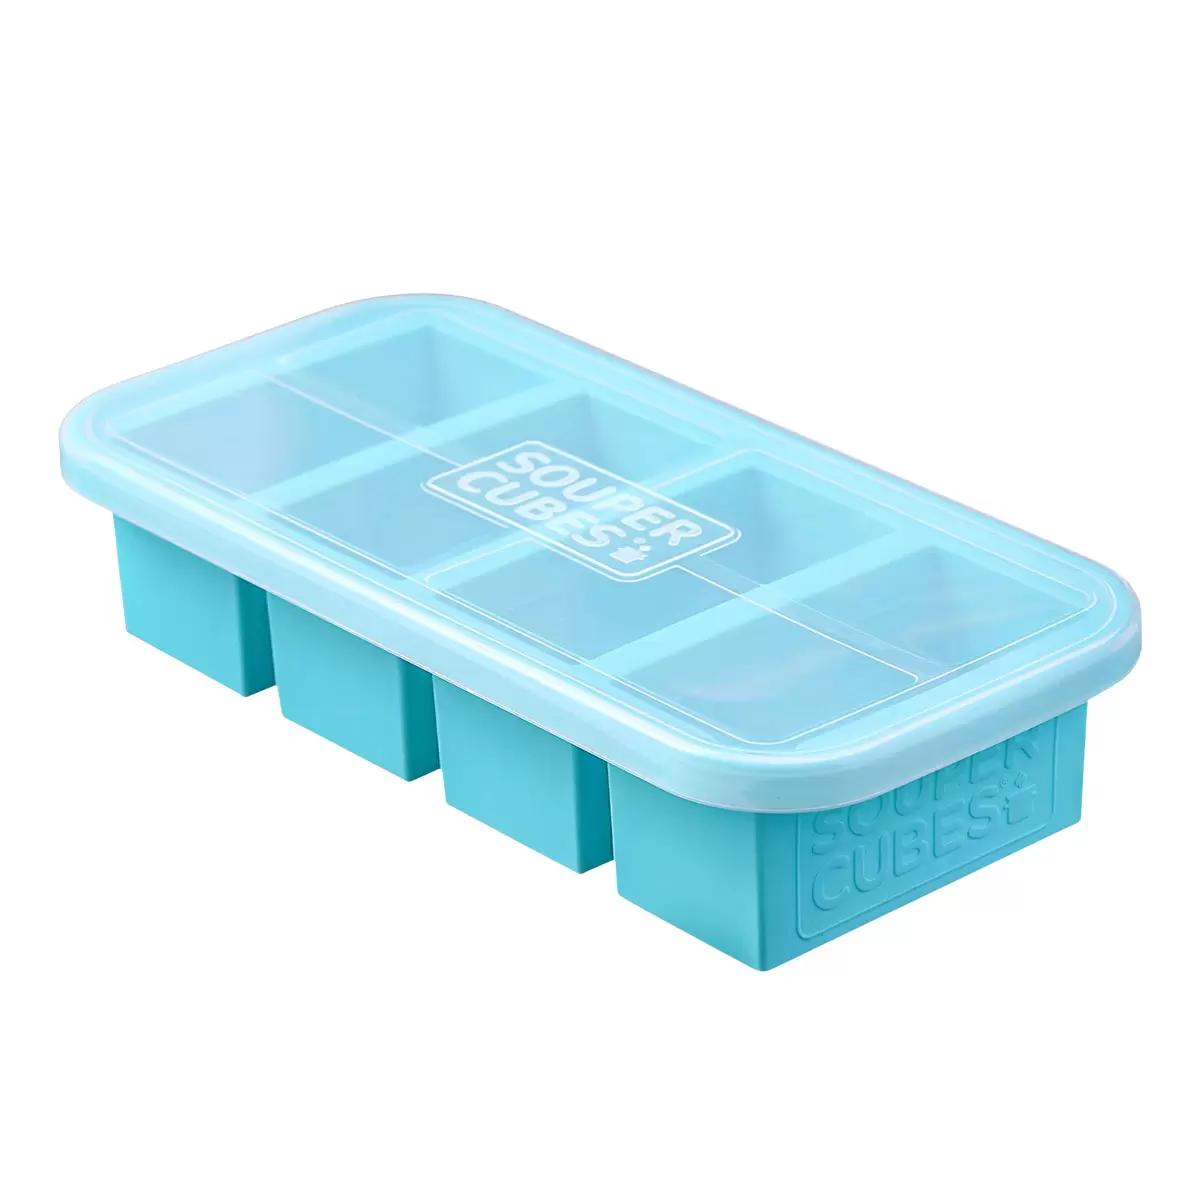 https://www.containerstore.com/catalogimages/481899/10094070-souper-cubes-1-cup-tray-aqu.jpg